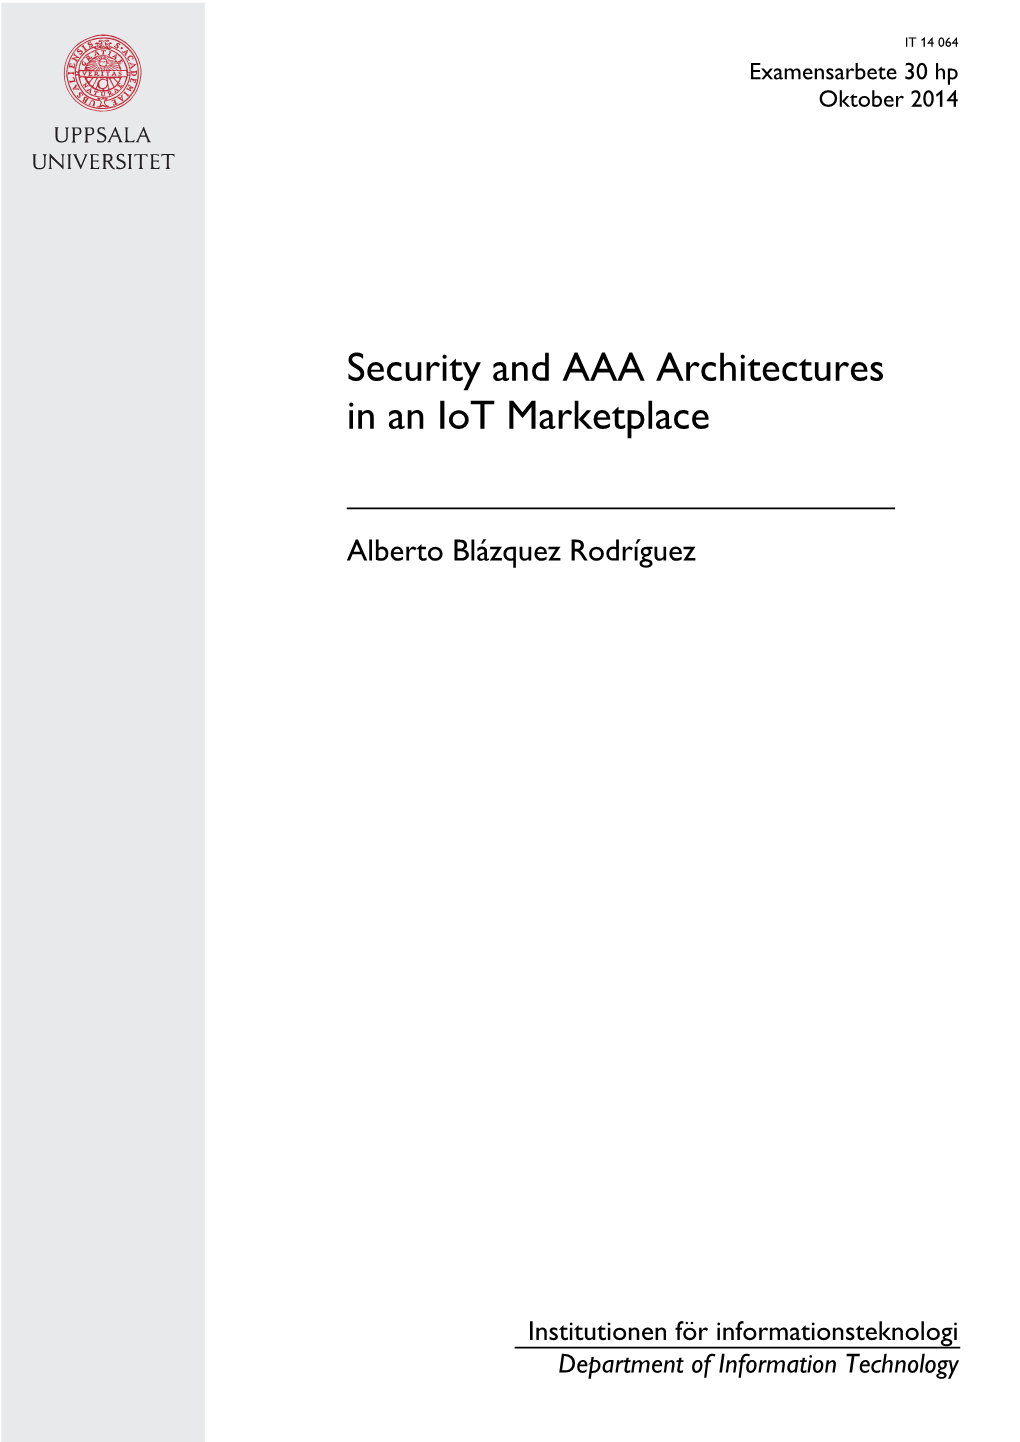 Security and AAA Architectures in an Iot Marketplace